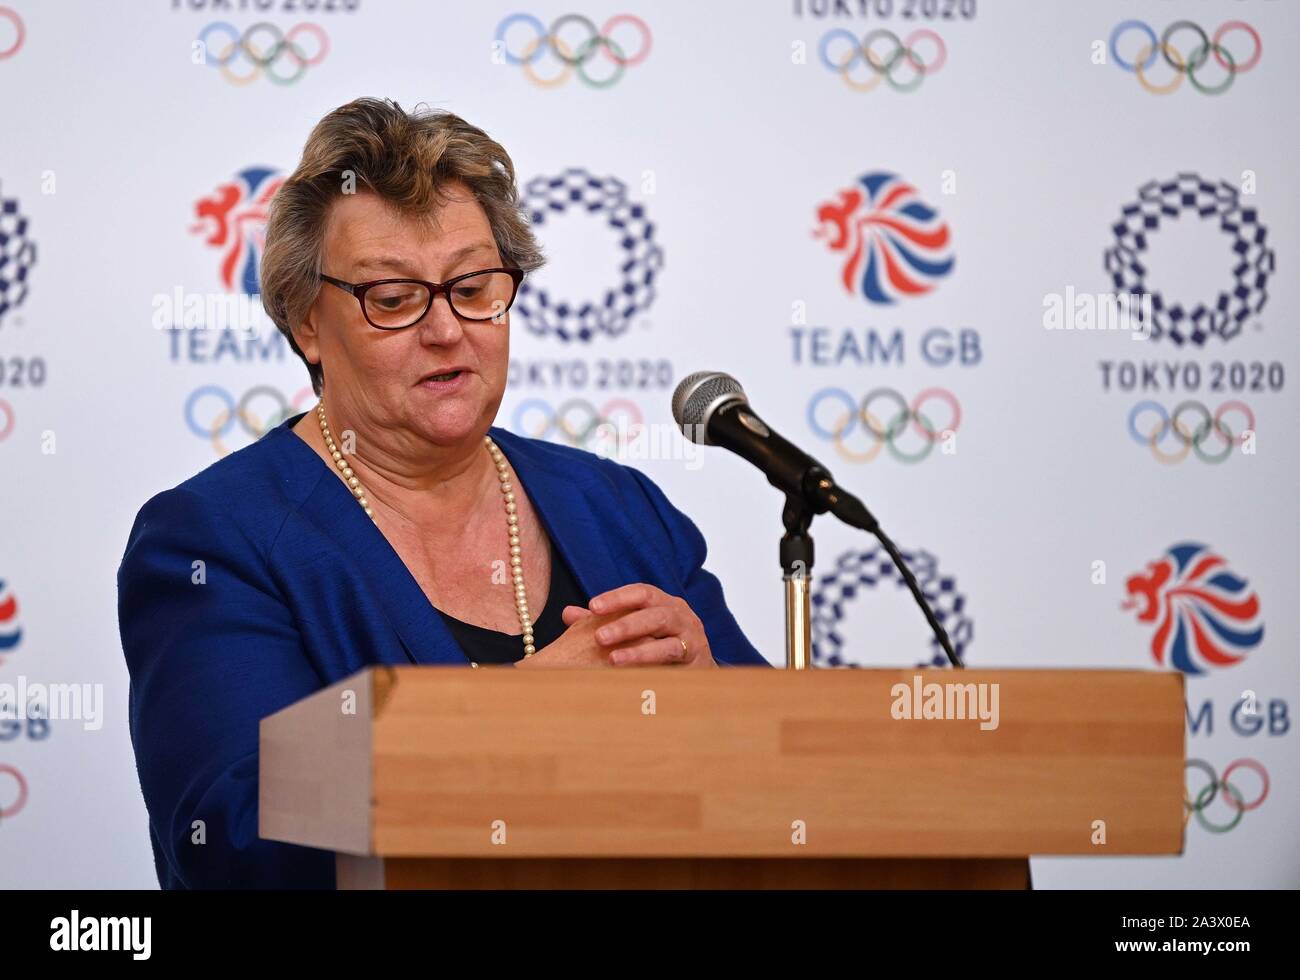 Westminster. United Kingdom. 10 October 2019. Heather Wheeler (MP)addresses the athgletes from the 1964 Tokyo games. TeamGB announce the Canoe athletes for the Tokyo 2020 Olympics. Foreign and Commonwealth Office. Westminster. London. United Kingdom. Credit Garry Bowden/Sport in Pictures/Alamy Live News. Stock Photo